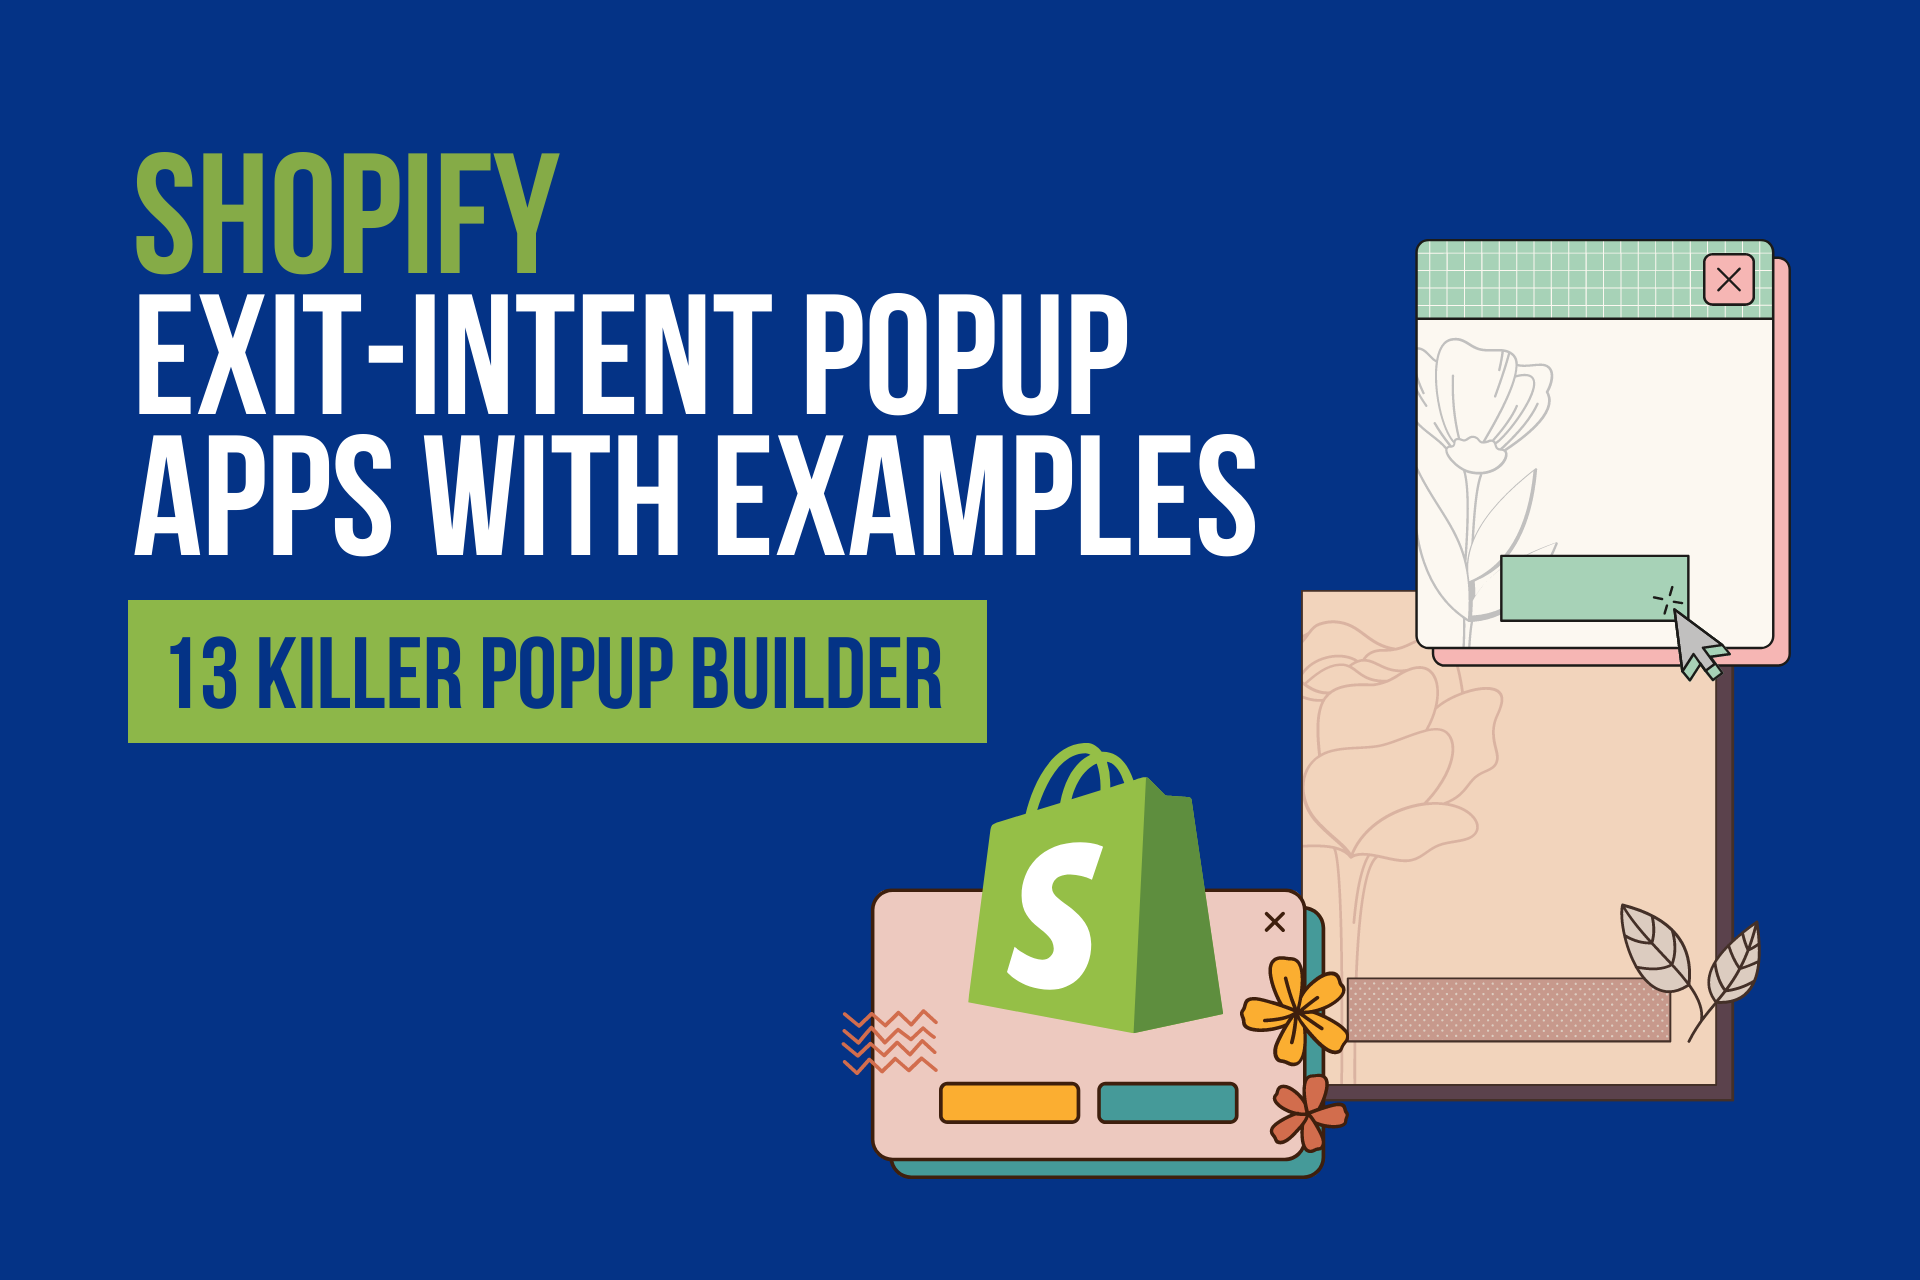 13 Killer Shopify Exit Intent Popup Apps & Examples